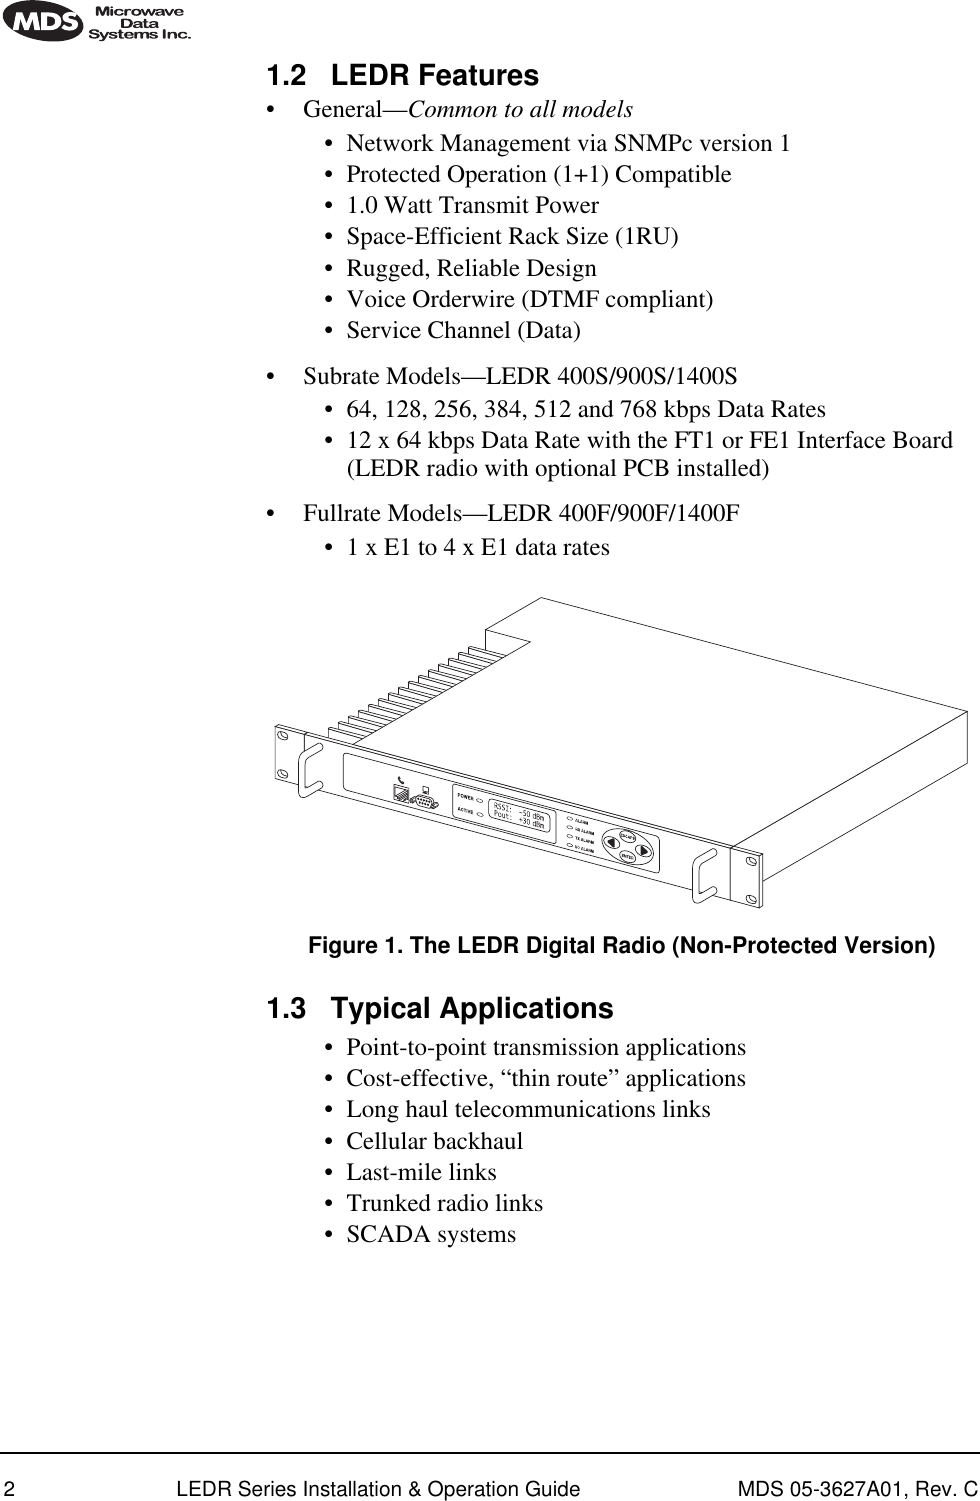  2 LEDR Series Installation &amp; Operation Guide MDS 05-3627A01, Rev. C 1.2 LEDR Features • General— Common to all models • Network Management via SNMPc version 1• Protected Operation (1+1) Compatible• 1.0 Watt Transmit Power• Space-Efficient Rack Size (1RU)• Rugged, Reliable Design• Voice Orderwire (DTMF compliant)• Service Channel (Data)• Subrate Models—LEDR 400S/900S/1400S• 64, 128, 256, 384, 512 and 768 kbps Data Rates• 12 x 64 kbps Data Rate with the FT1 or FE1 Interface Board (LEDR radio with optional PCB installed)• Fullrate Models—LEDR 400F/900F/1400F• 1 x E1 to 4 x E1 data rates Invisible place holder Figure 1. The LEDR Digital Radio (Non-Protected Version) 1.3 Typical Applications • Point-to-point transmission applications• Cost-effective, “thin route” applications• Long haul telecommunications links• Cellular backhaul• Last-mile links• Trunked radio links• SCADA systems